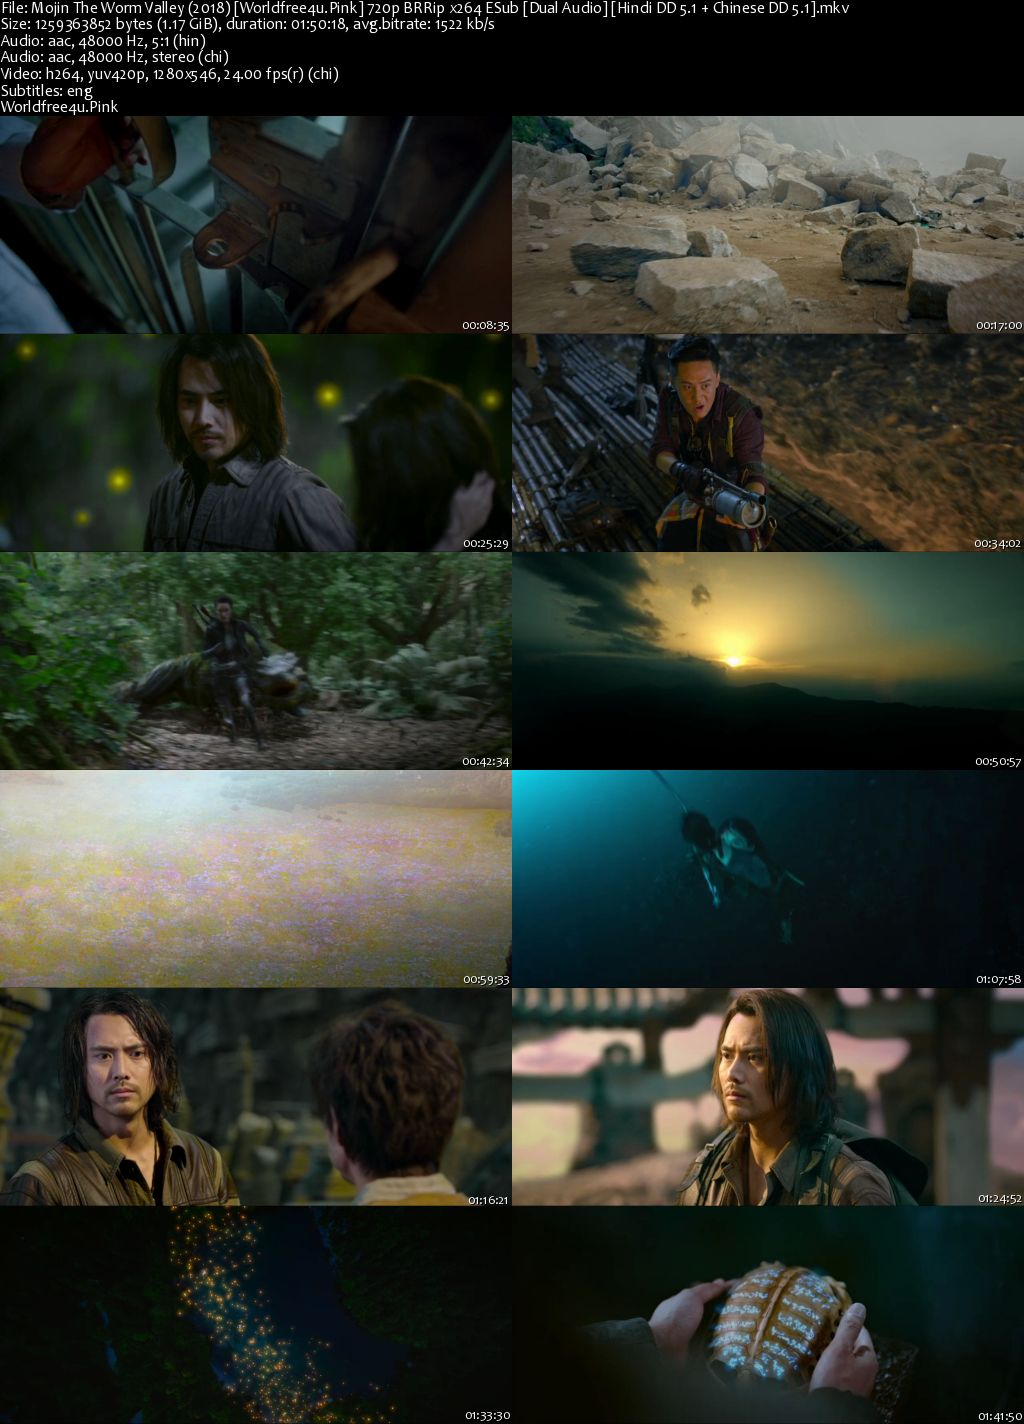 Mojin: The Worm Valley 2018 BRRip 720p Dual Audio